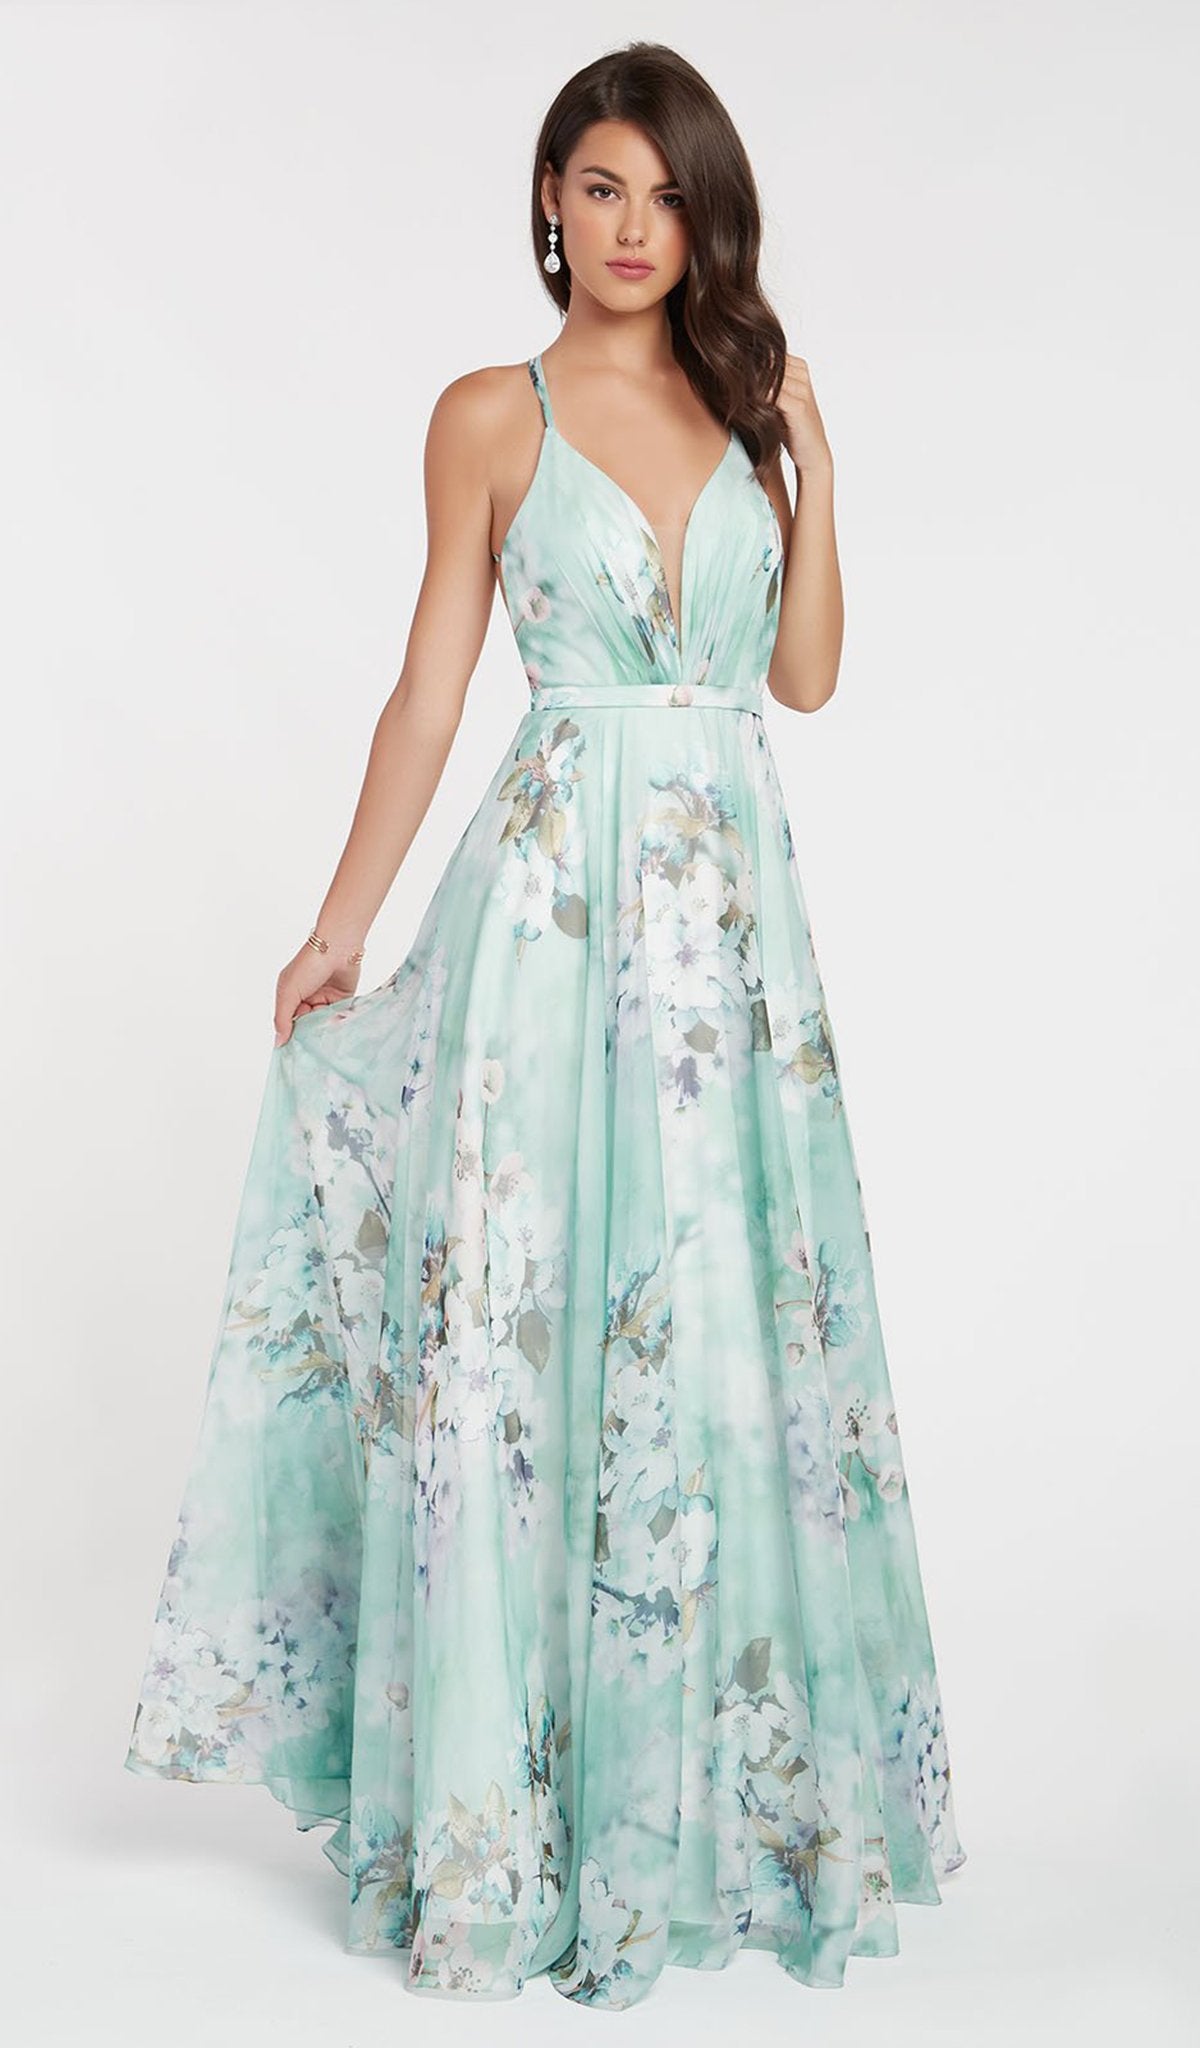 Alyce Paris - 60440 Sleeveless Printed Chiffon Sexy Back A-Line Dress In Green and Multi-Color